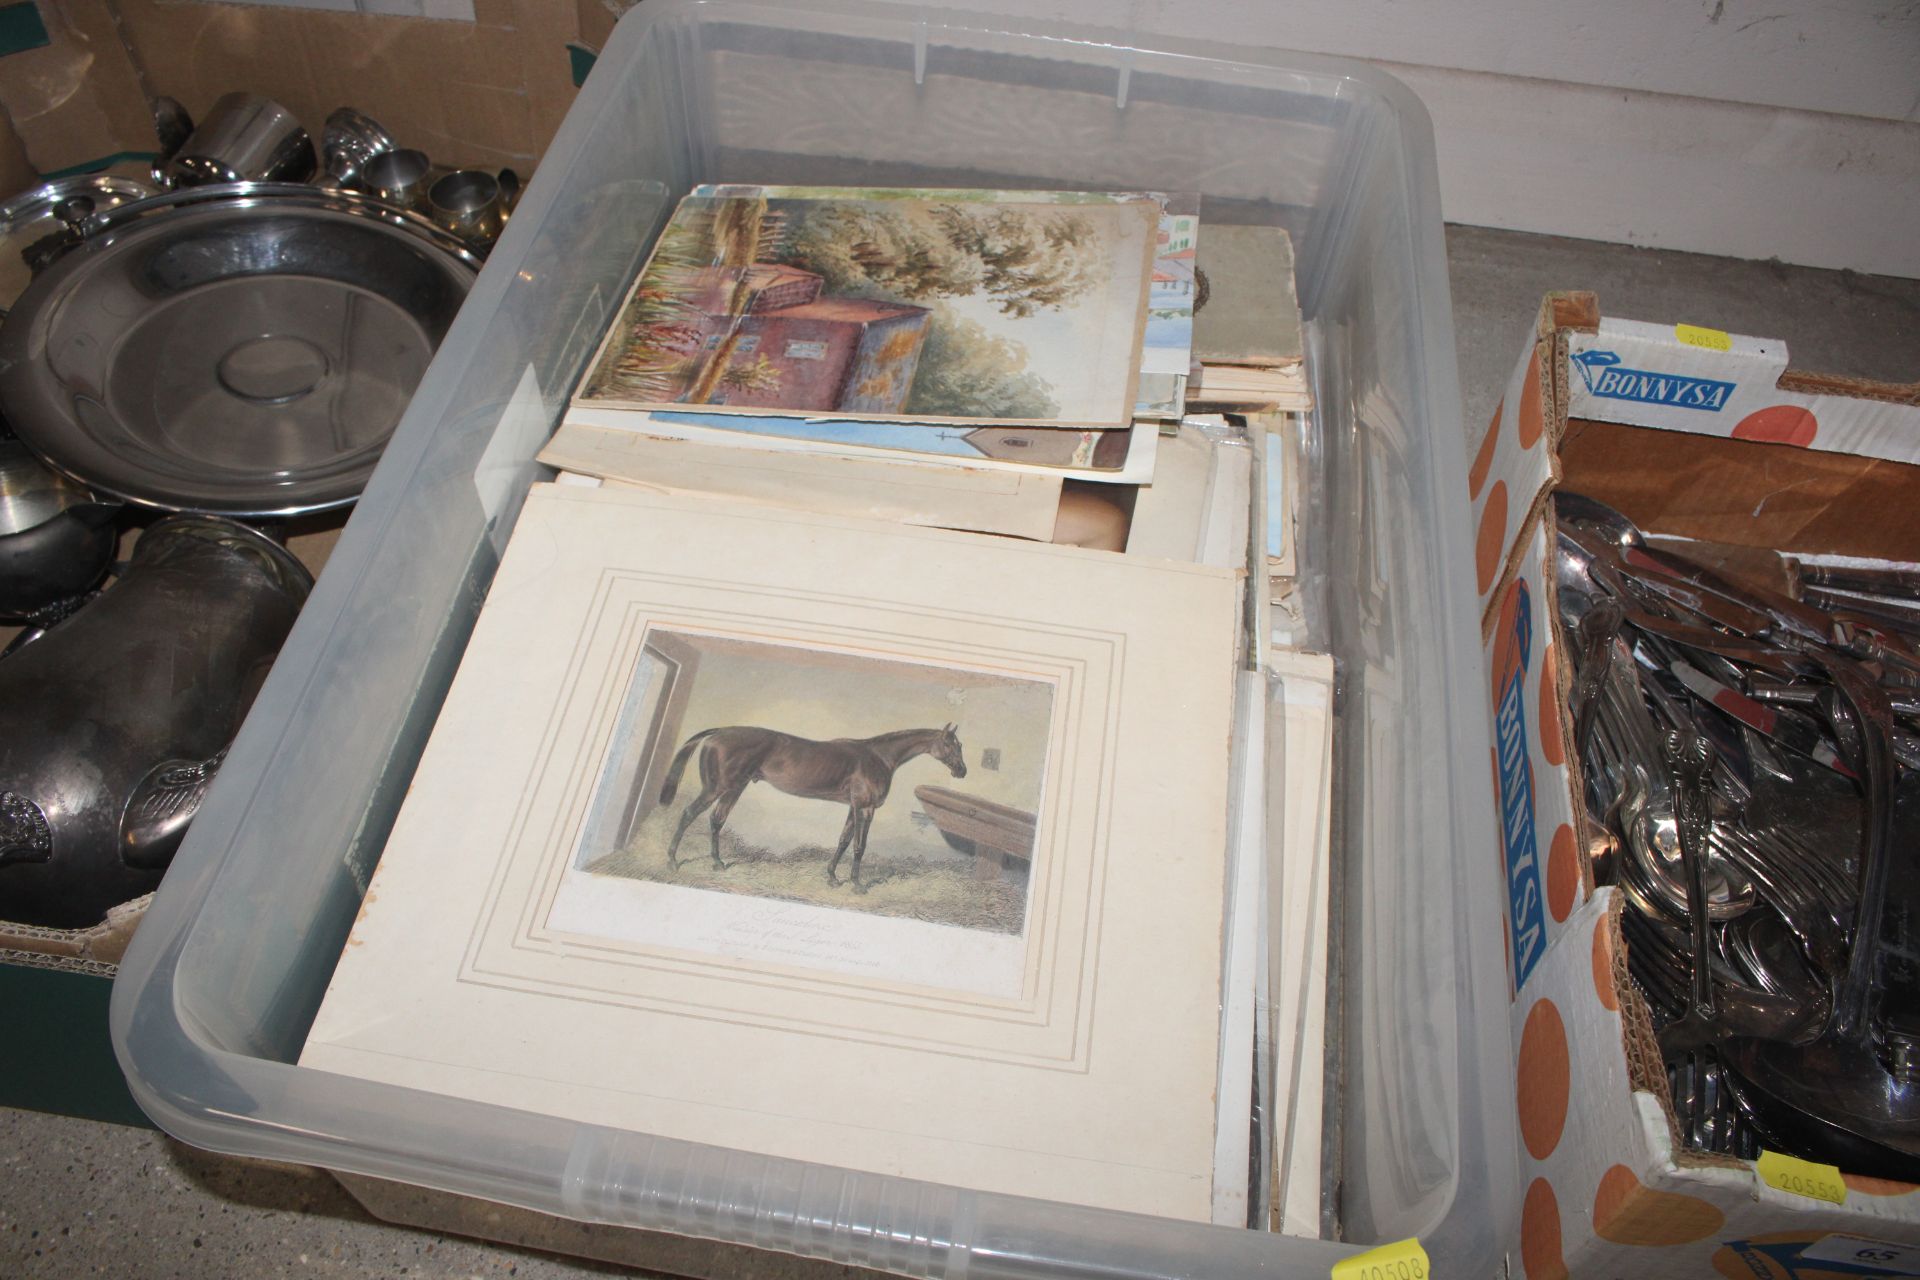 A plastic crate and contents of a large assortment